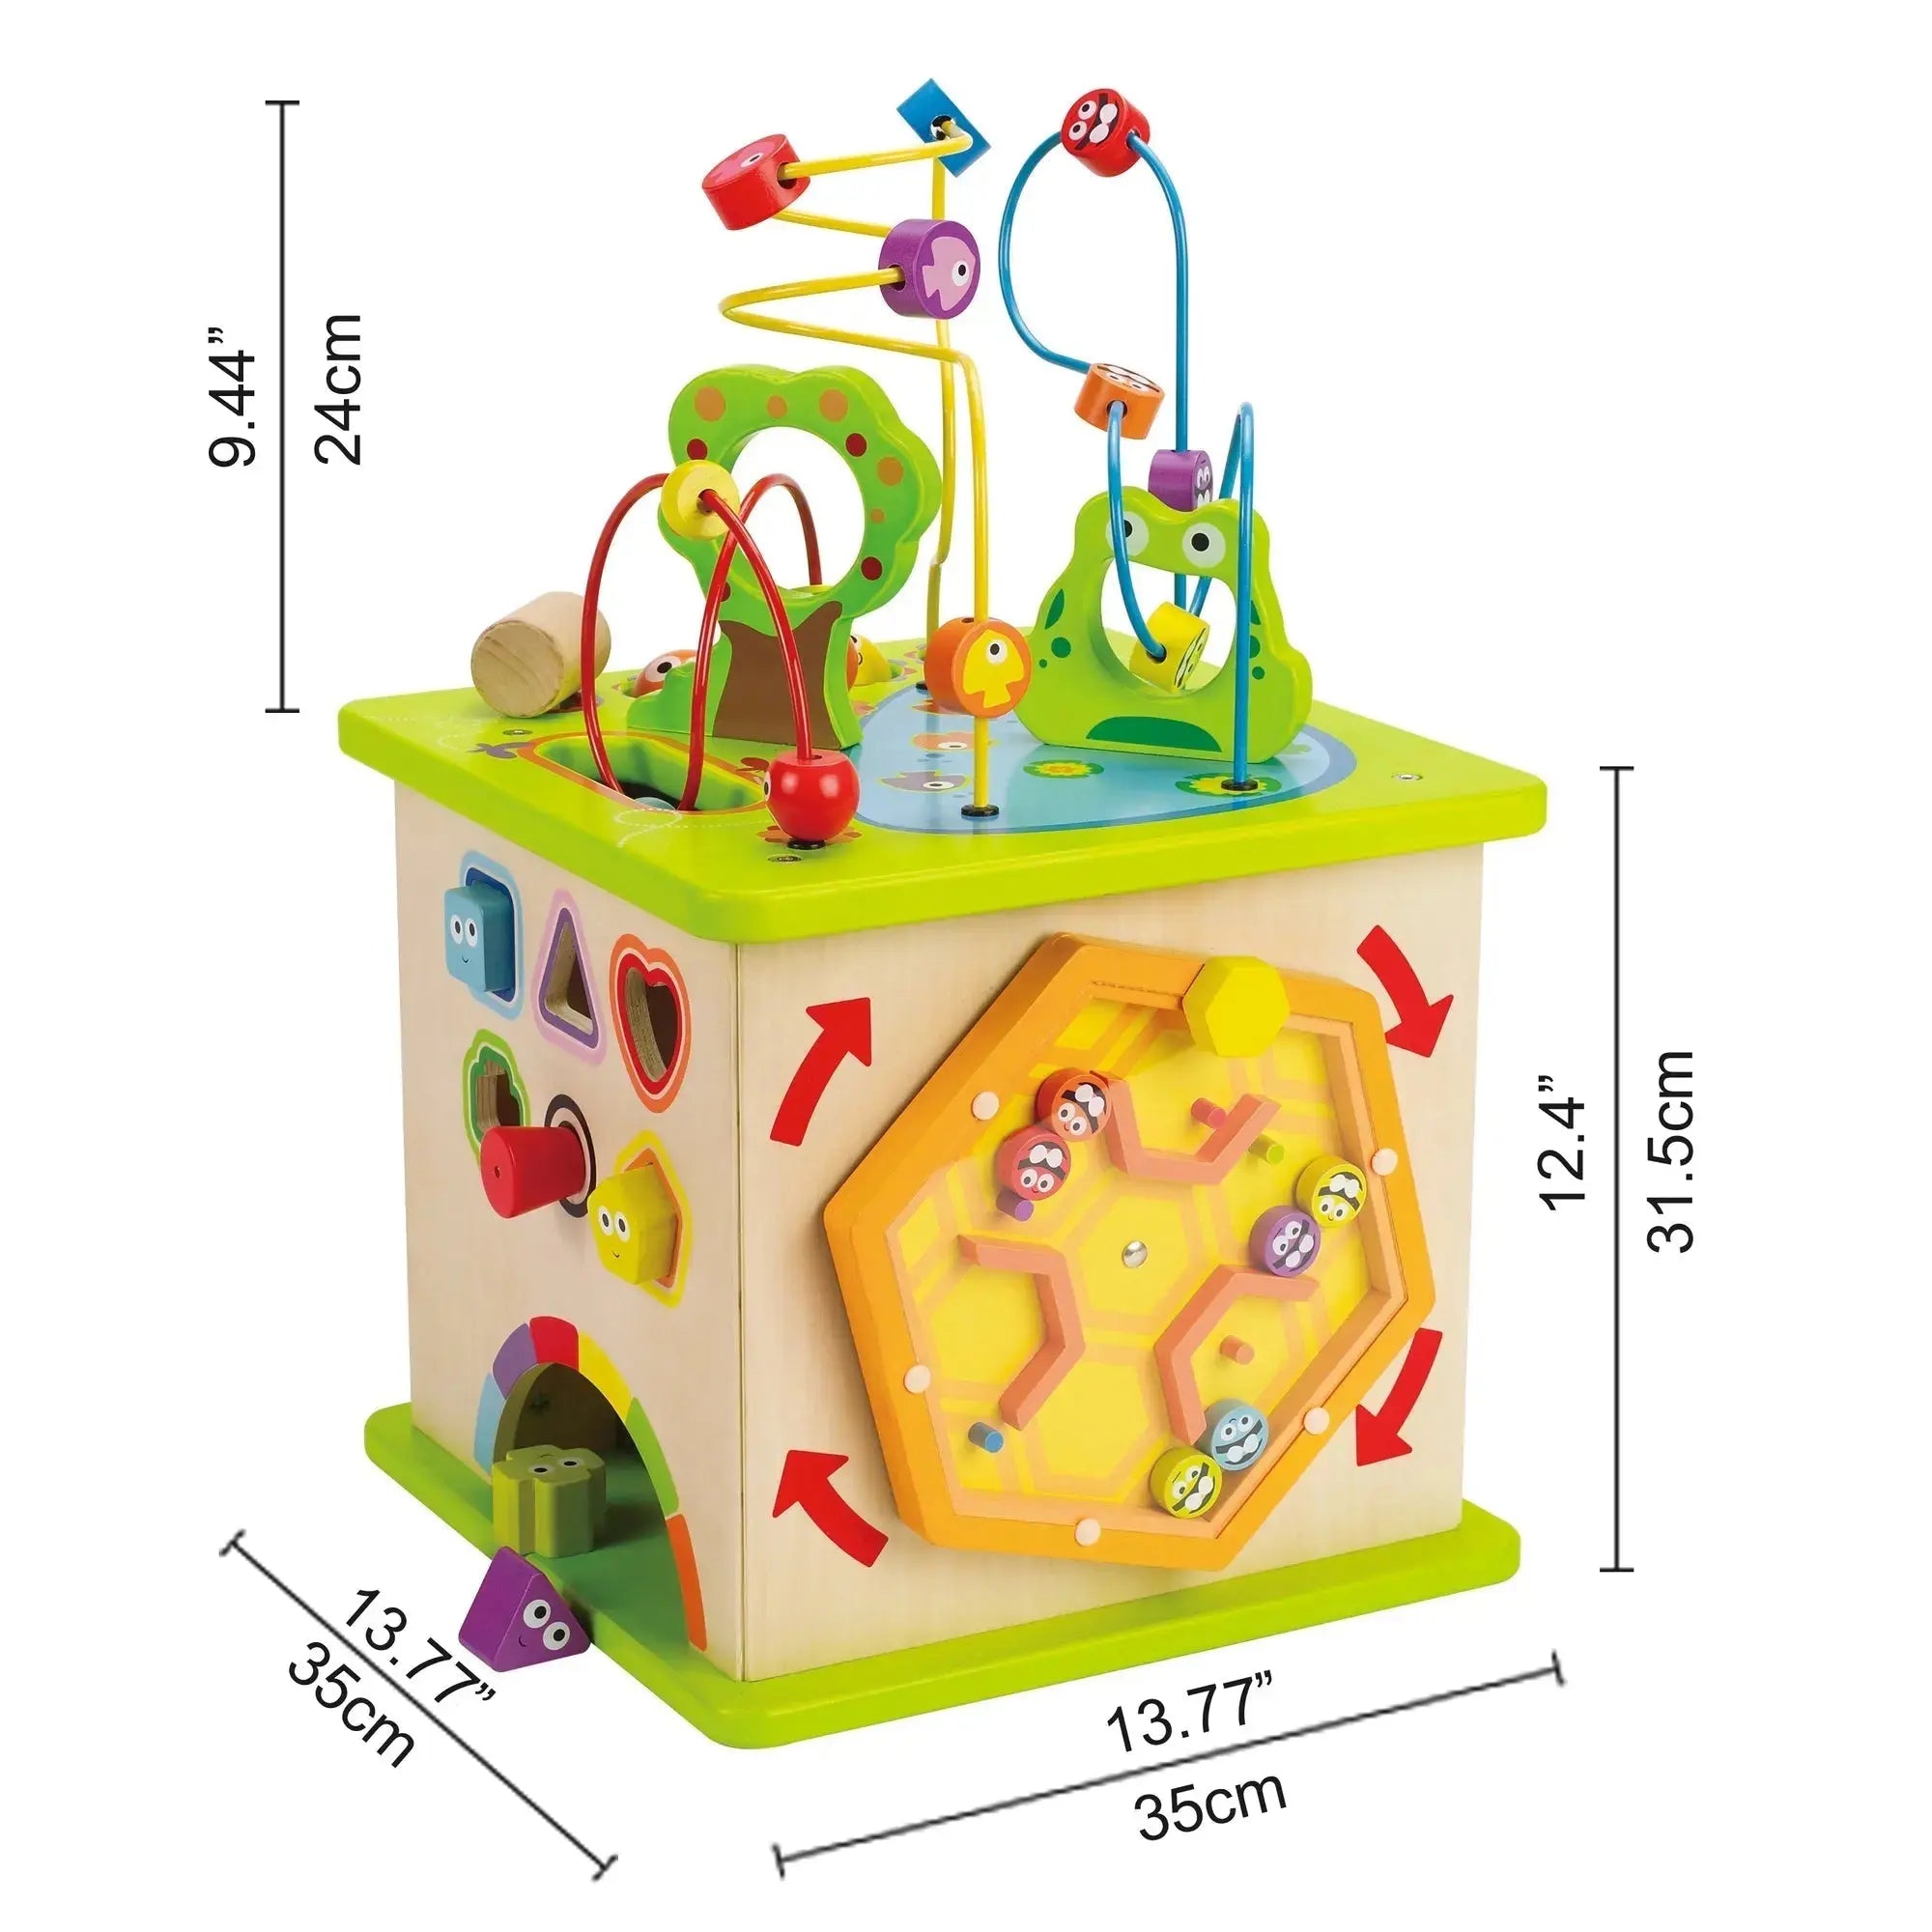 Hape Country Critters Wooden Activity Play Cube - – Hape Toys 